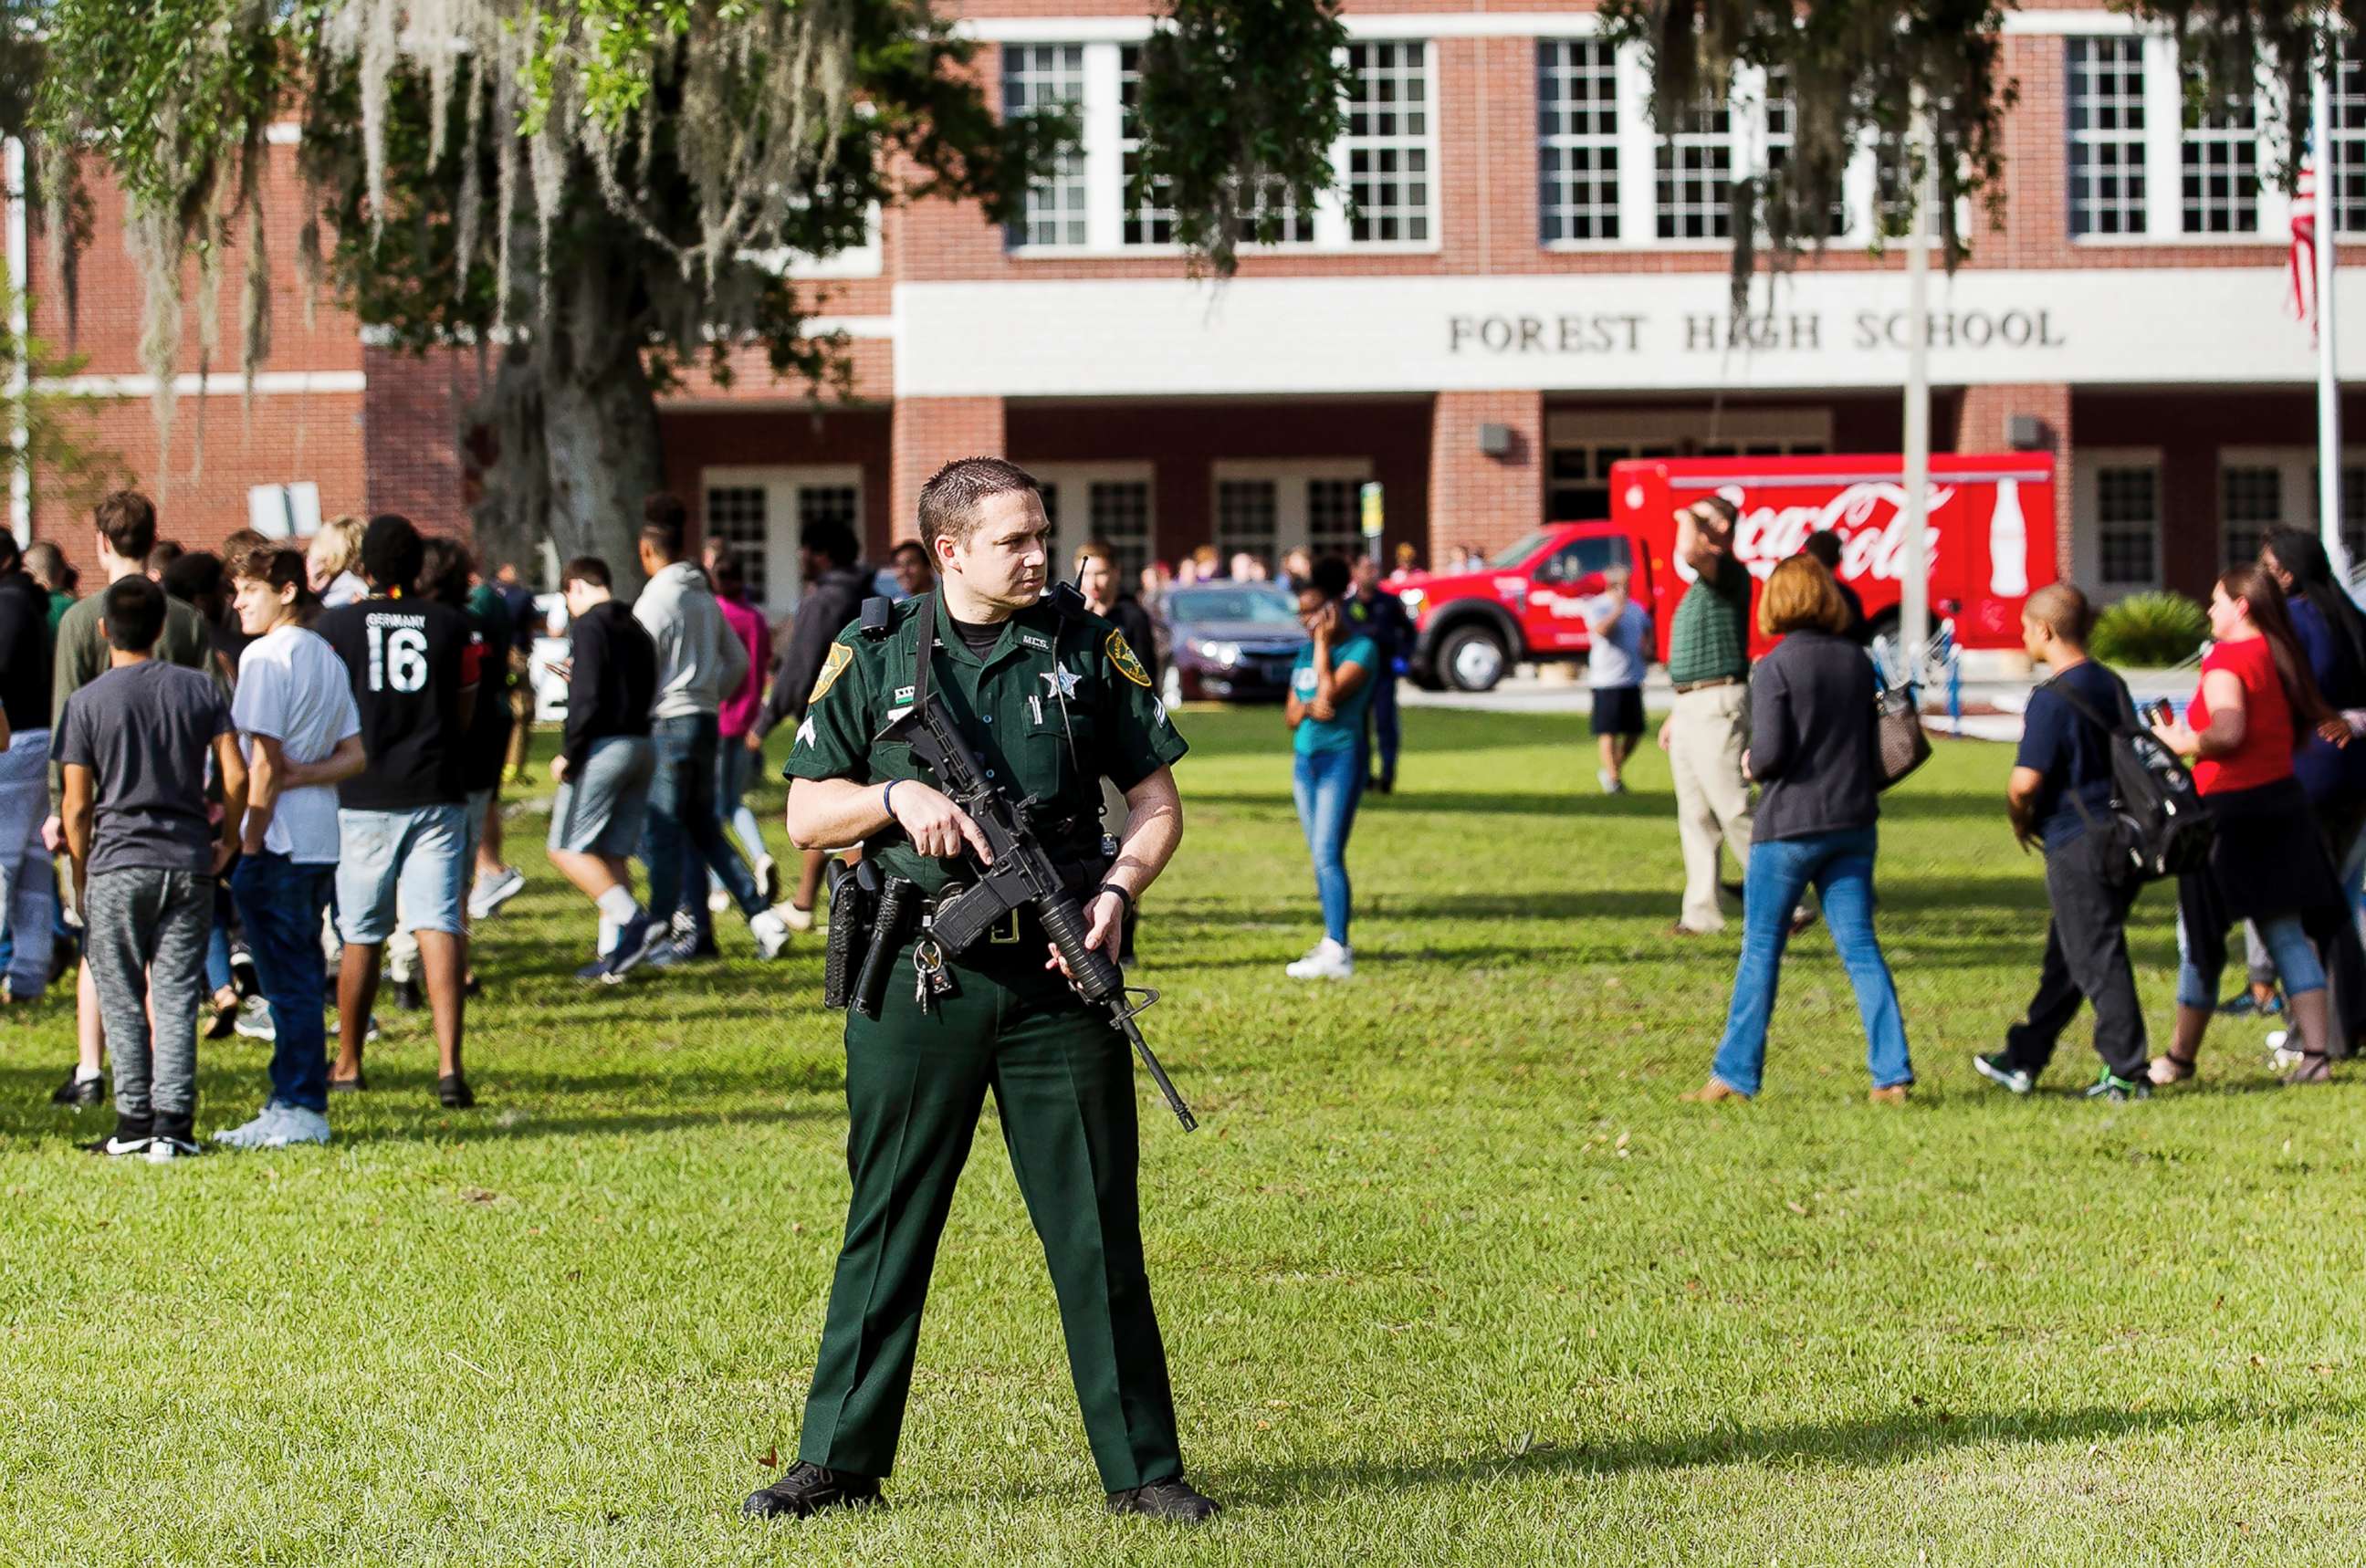 PHOTO: A Marion County Sheriff's Deputy stands outside Forest High School as students exit the school after a school shooting occurred on April 20, 2018 in Ocala, Fla.